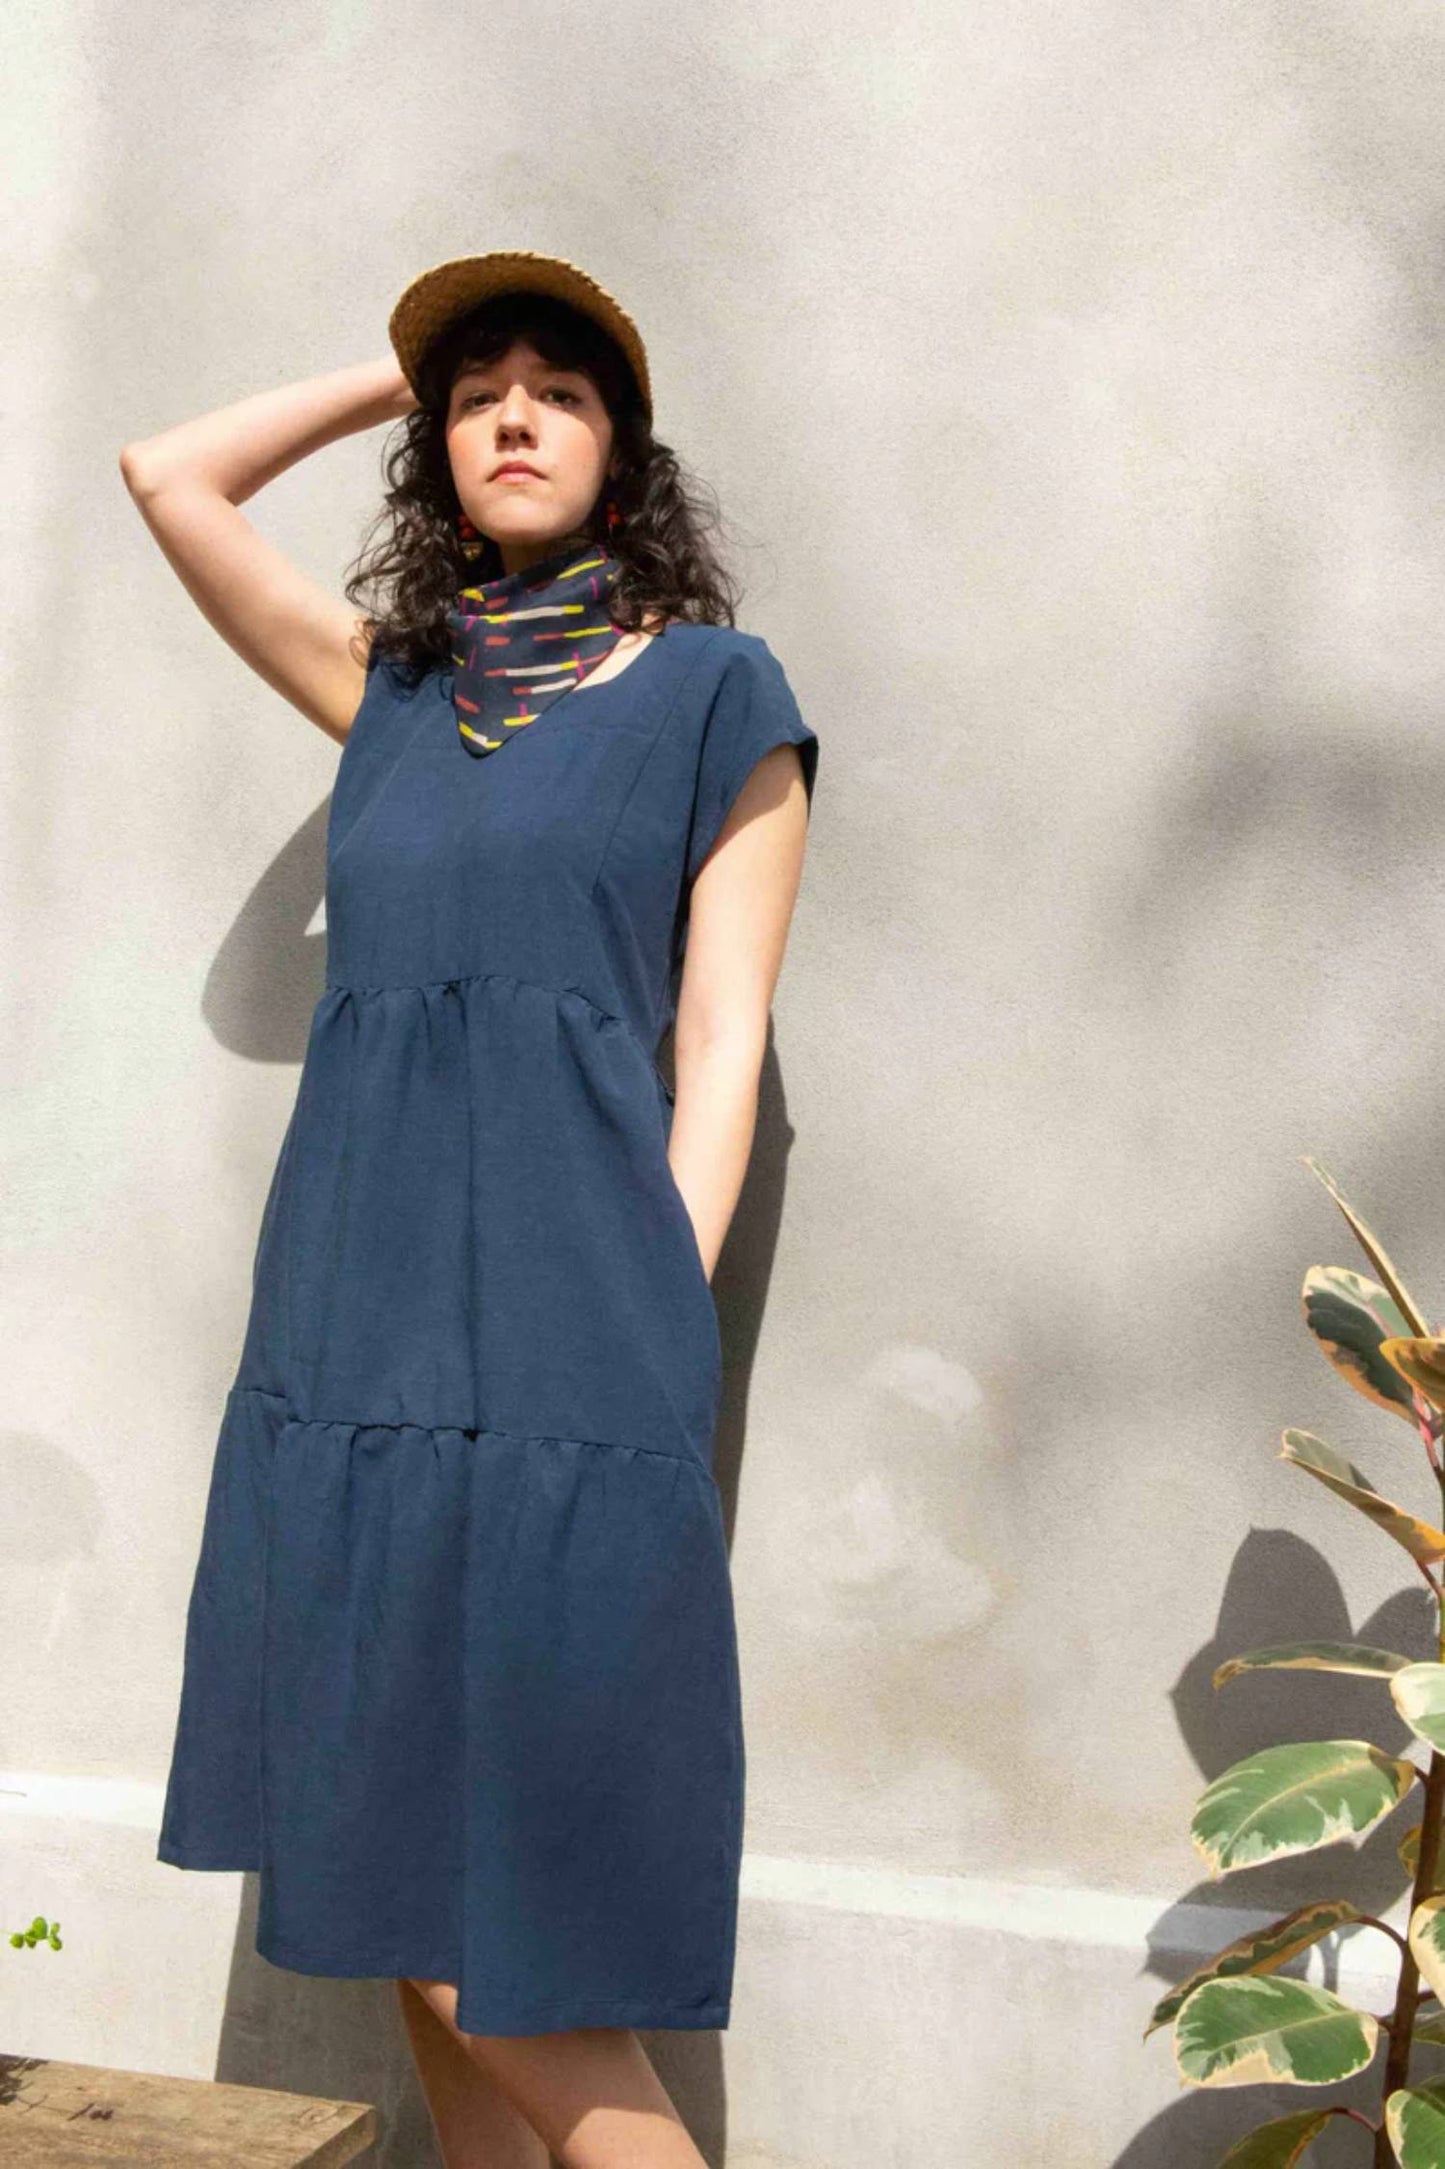 Aster Dress by Kazak, Indigo, midi-length, tiered skirt, loose fit, square neckline, short extended sleeves, eco-fabric, viscose, linen, OEKO-TEX certified, sizes XS to XL, made in Montreal